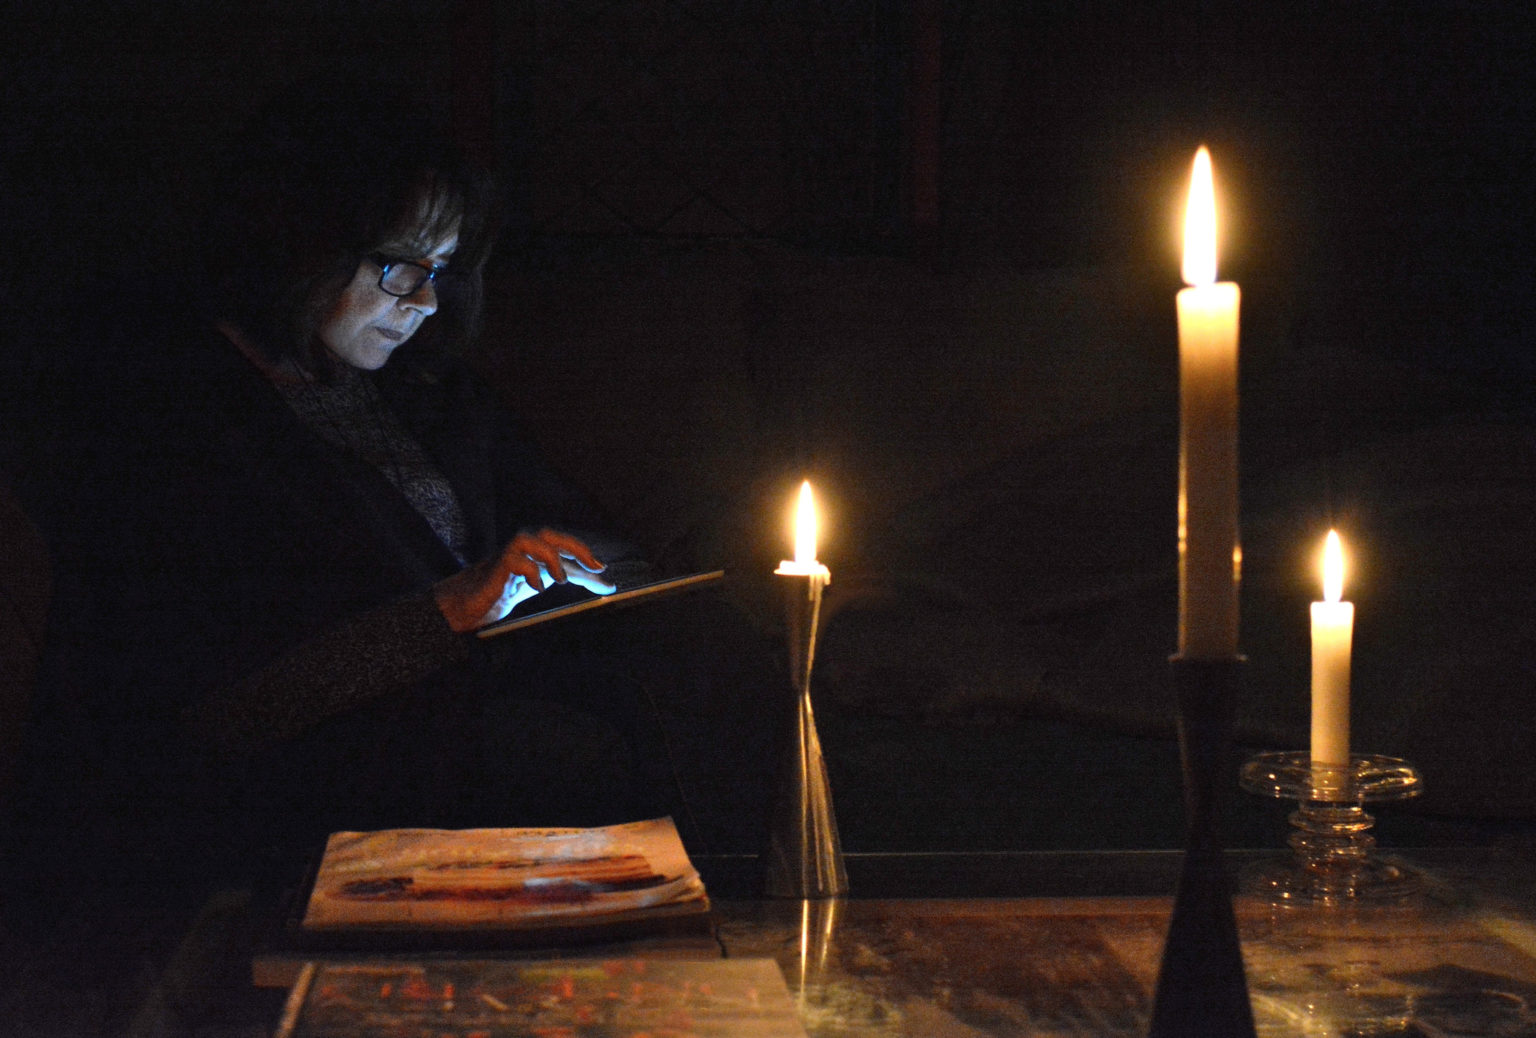 woman reading by candle light on her digital tablet, while awaiting the return of power to her home.